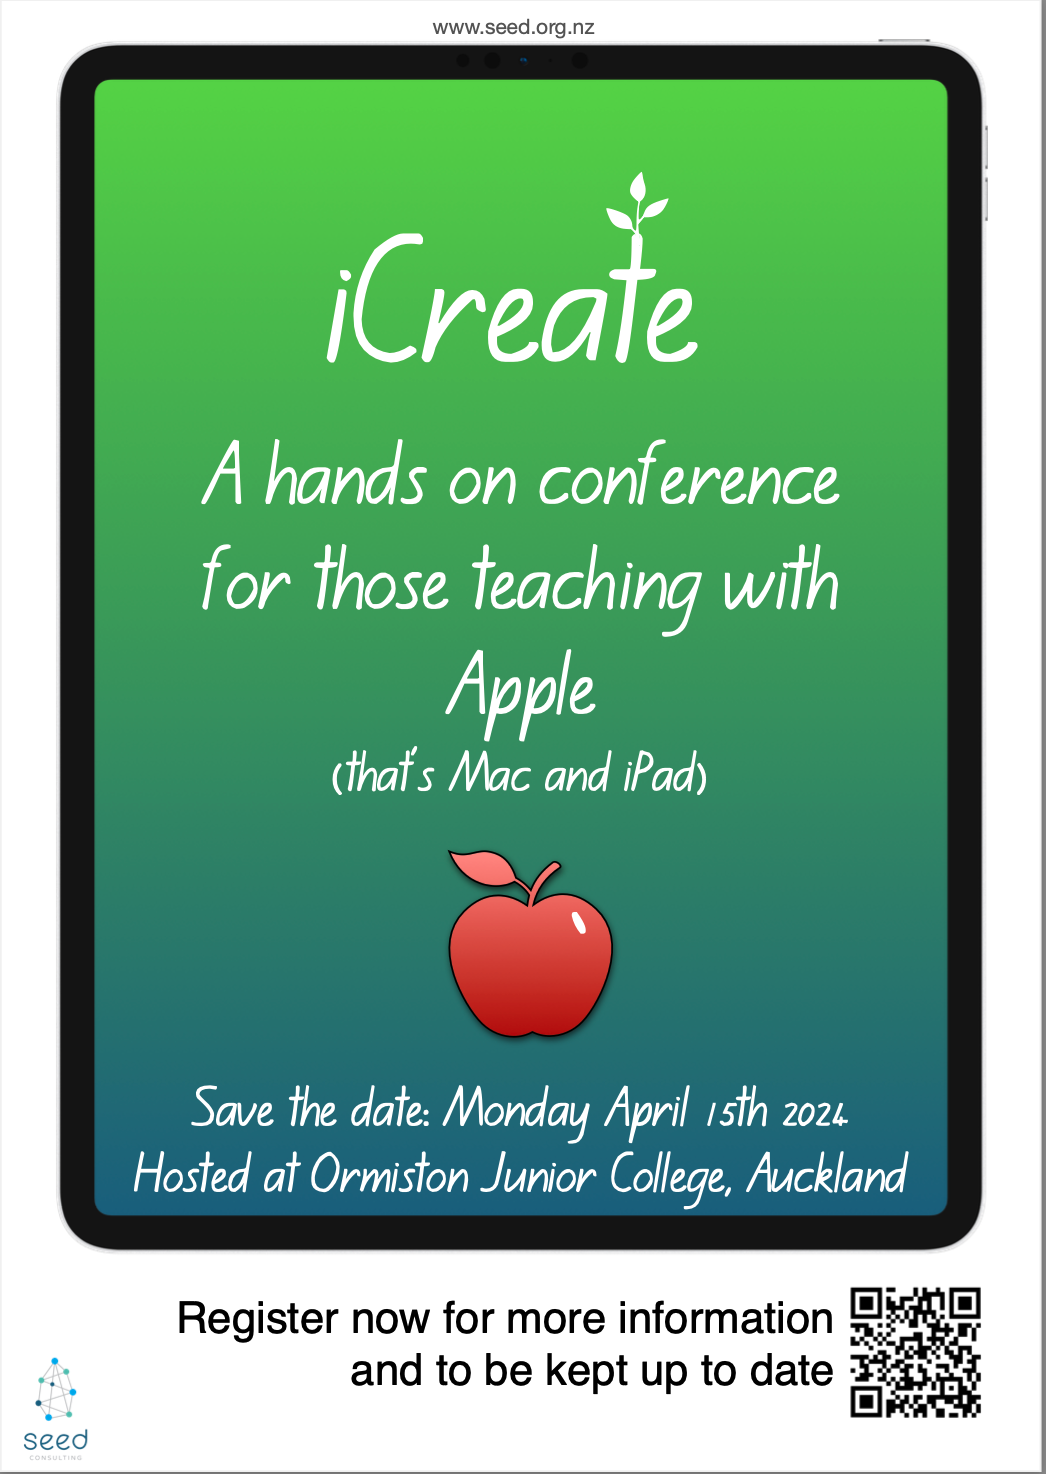 Conference Poster that says "A hands-on conference for those teaching with Apple (that’s Mac and iPad)"